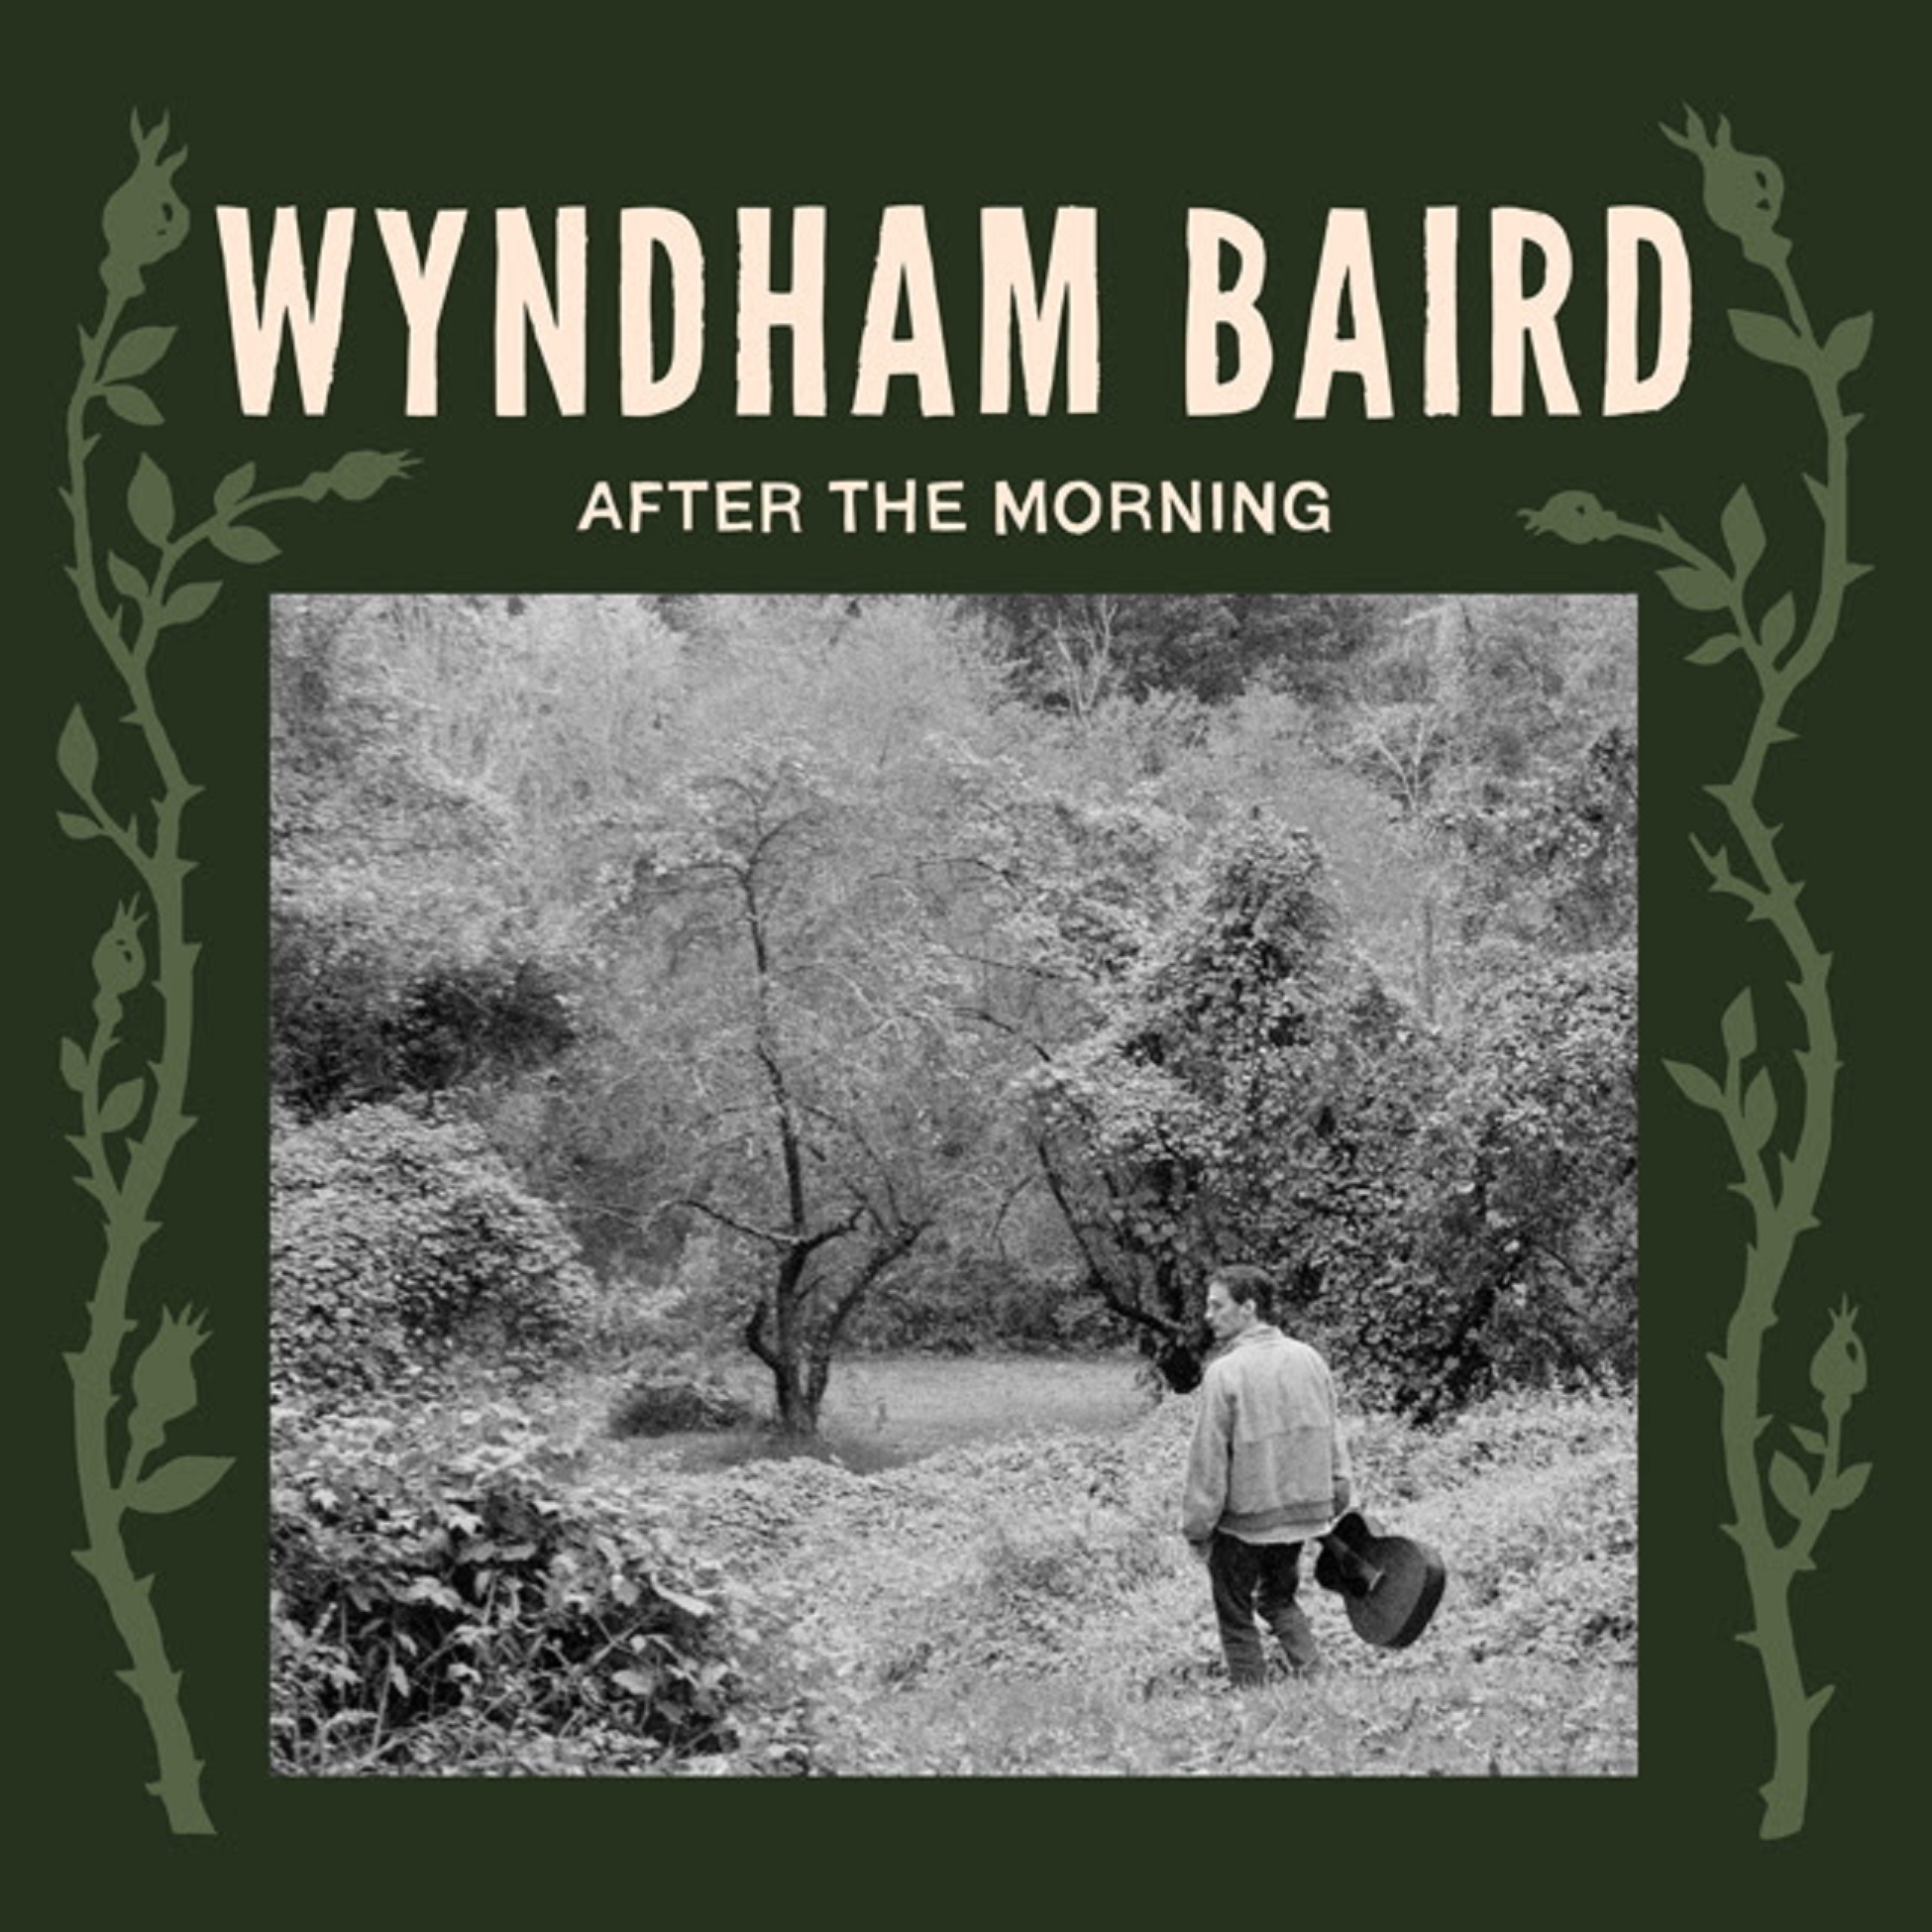 RAISED IN FOOTHILLS OF THE SMOKY MOUNTAINS & INSPIRED BY DOC WATSON, WYNDHAM BAIRD STEPS OUT FOR FULL-LENGTH DEBUT